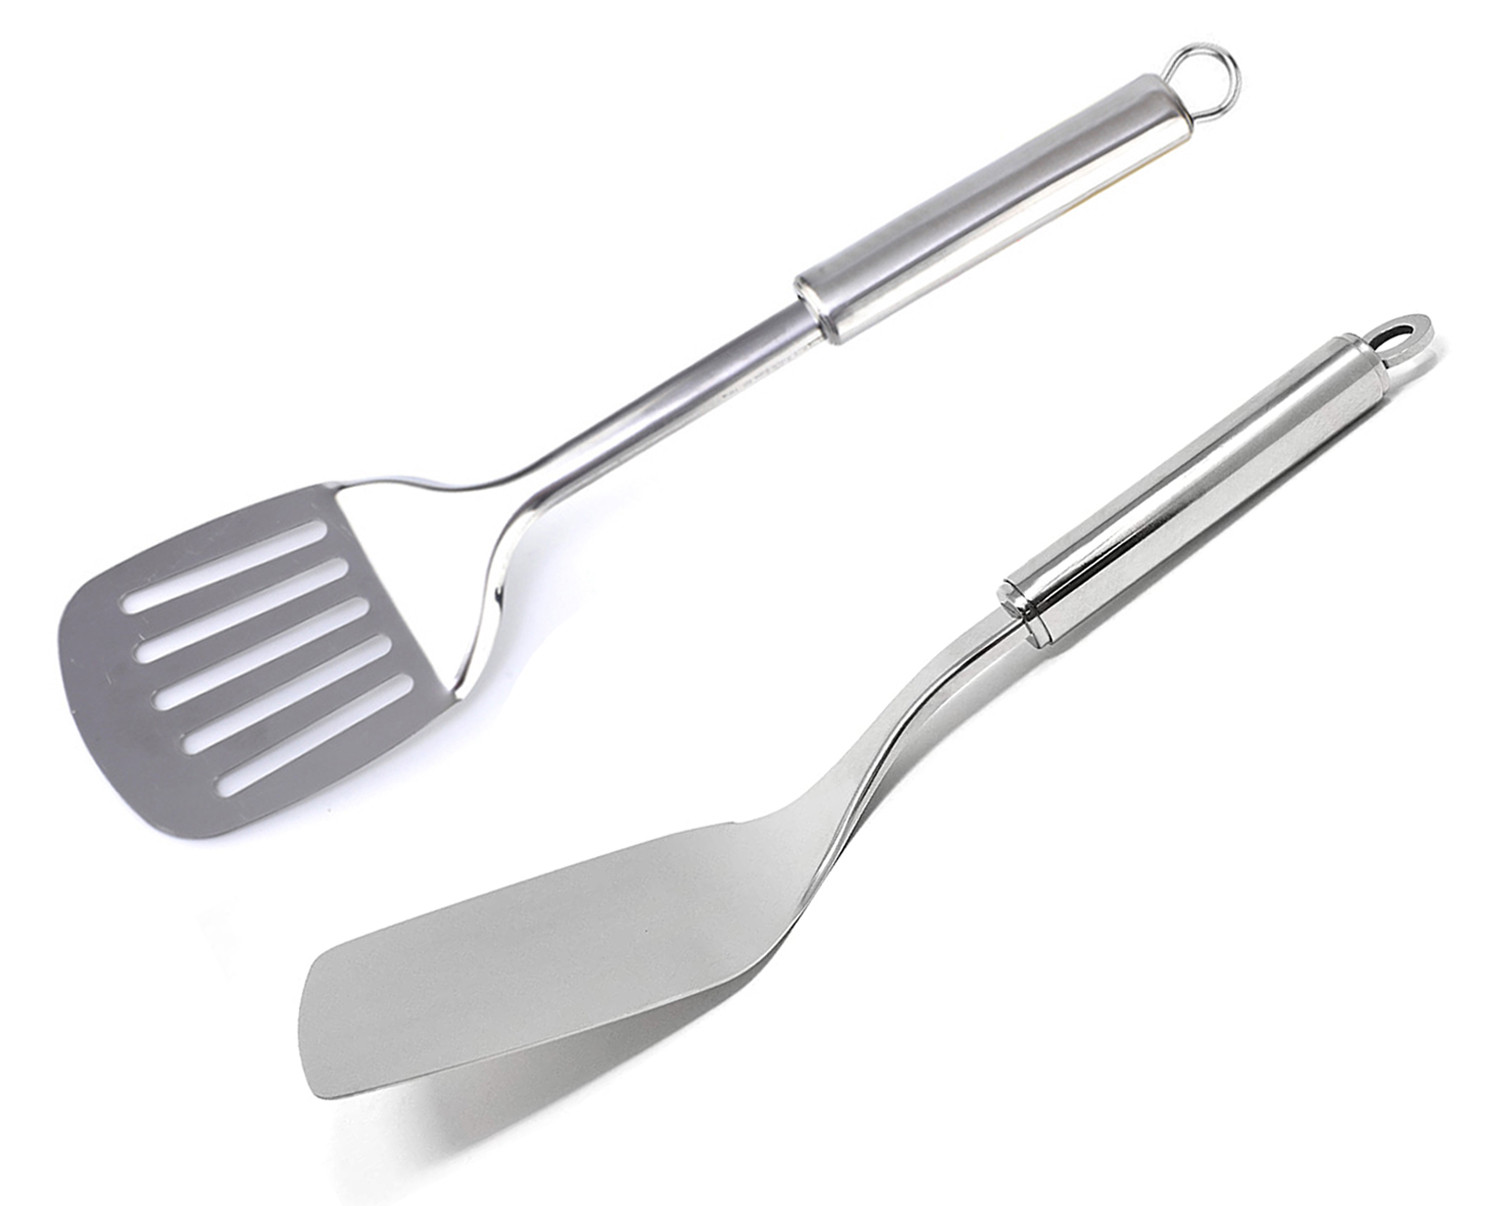 Kuber Industries Stainless Steel Kitchen Utensil Set of 2 (Slotted Turner & Spatula) Cooking Utensils - Nonstick Kitchen Utensils Cookware Set Best Kitchen Gadgets Kitchen Tool Set Gift (Silver)